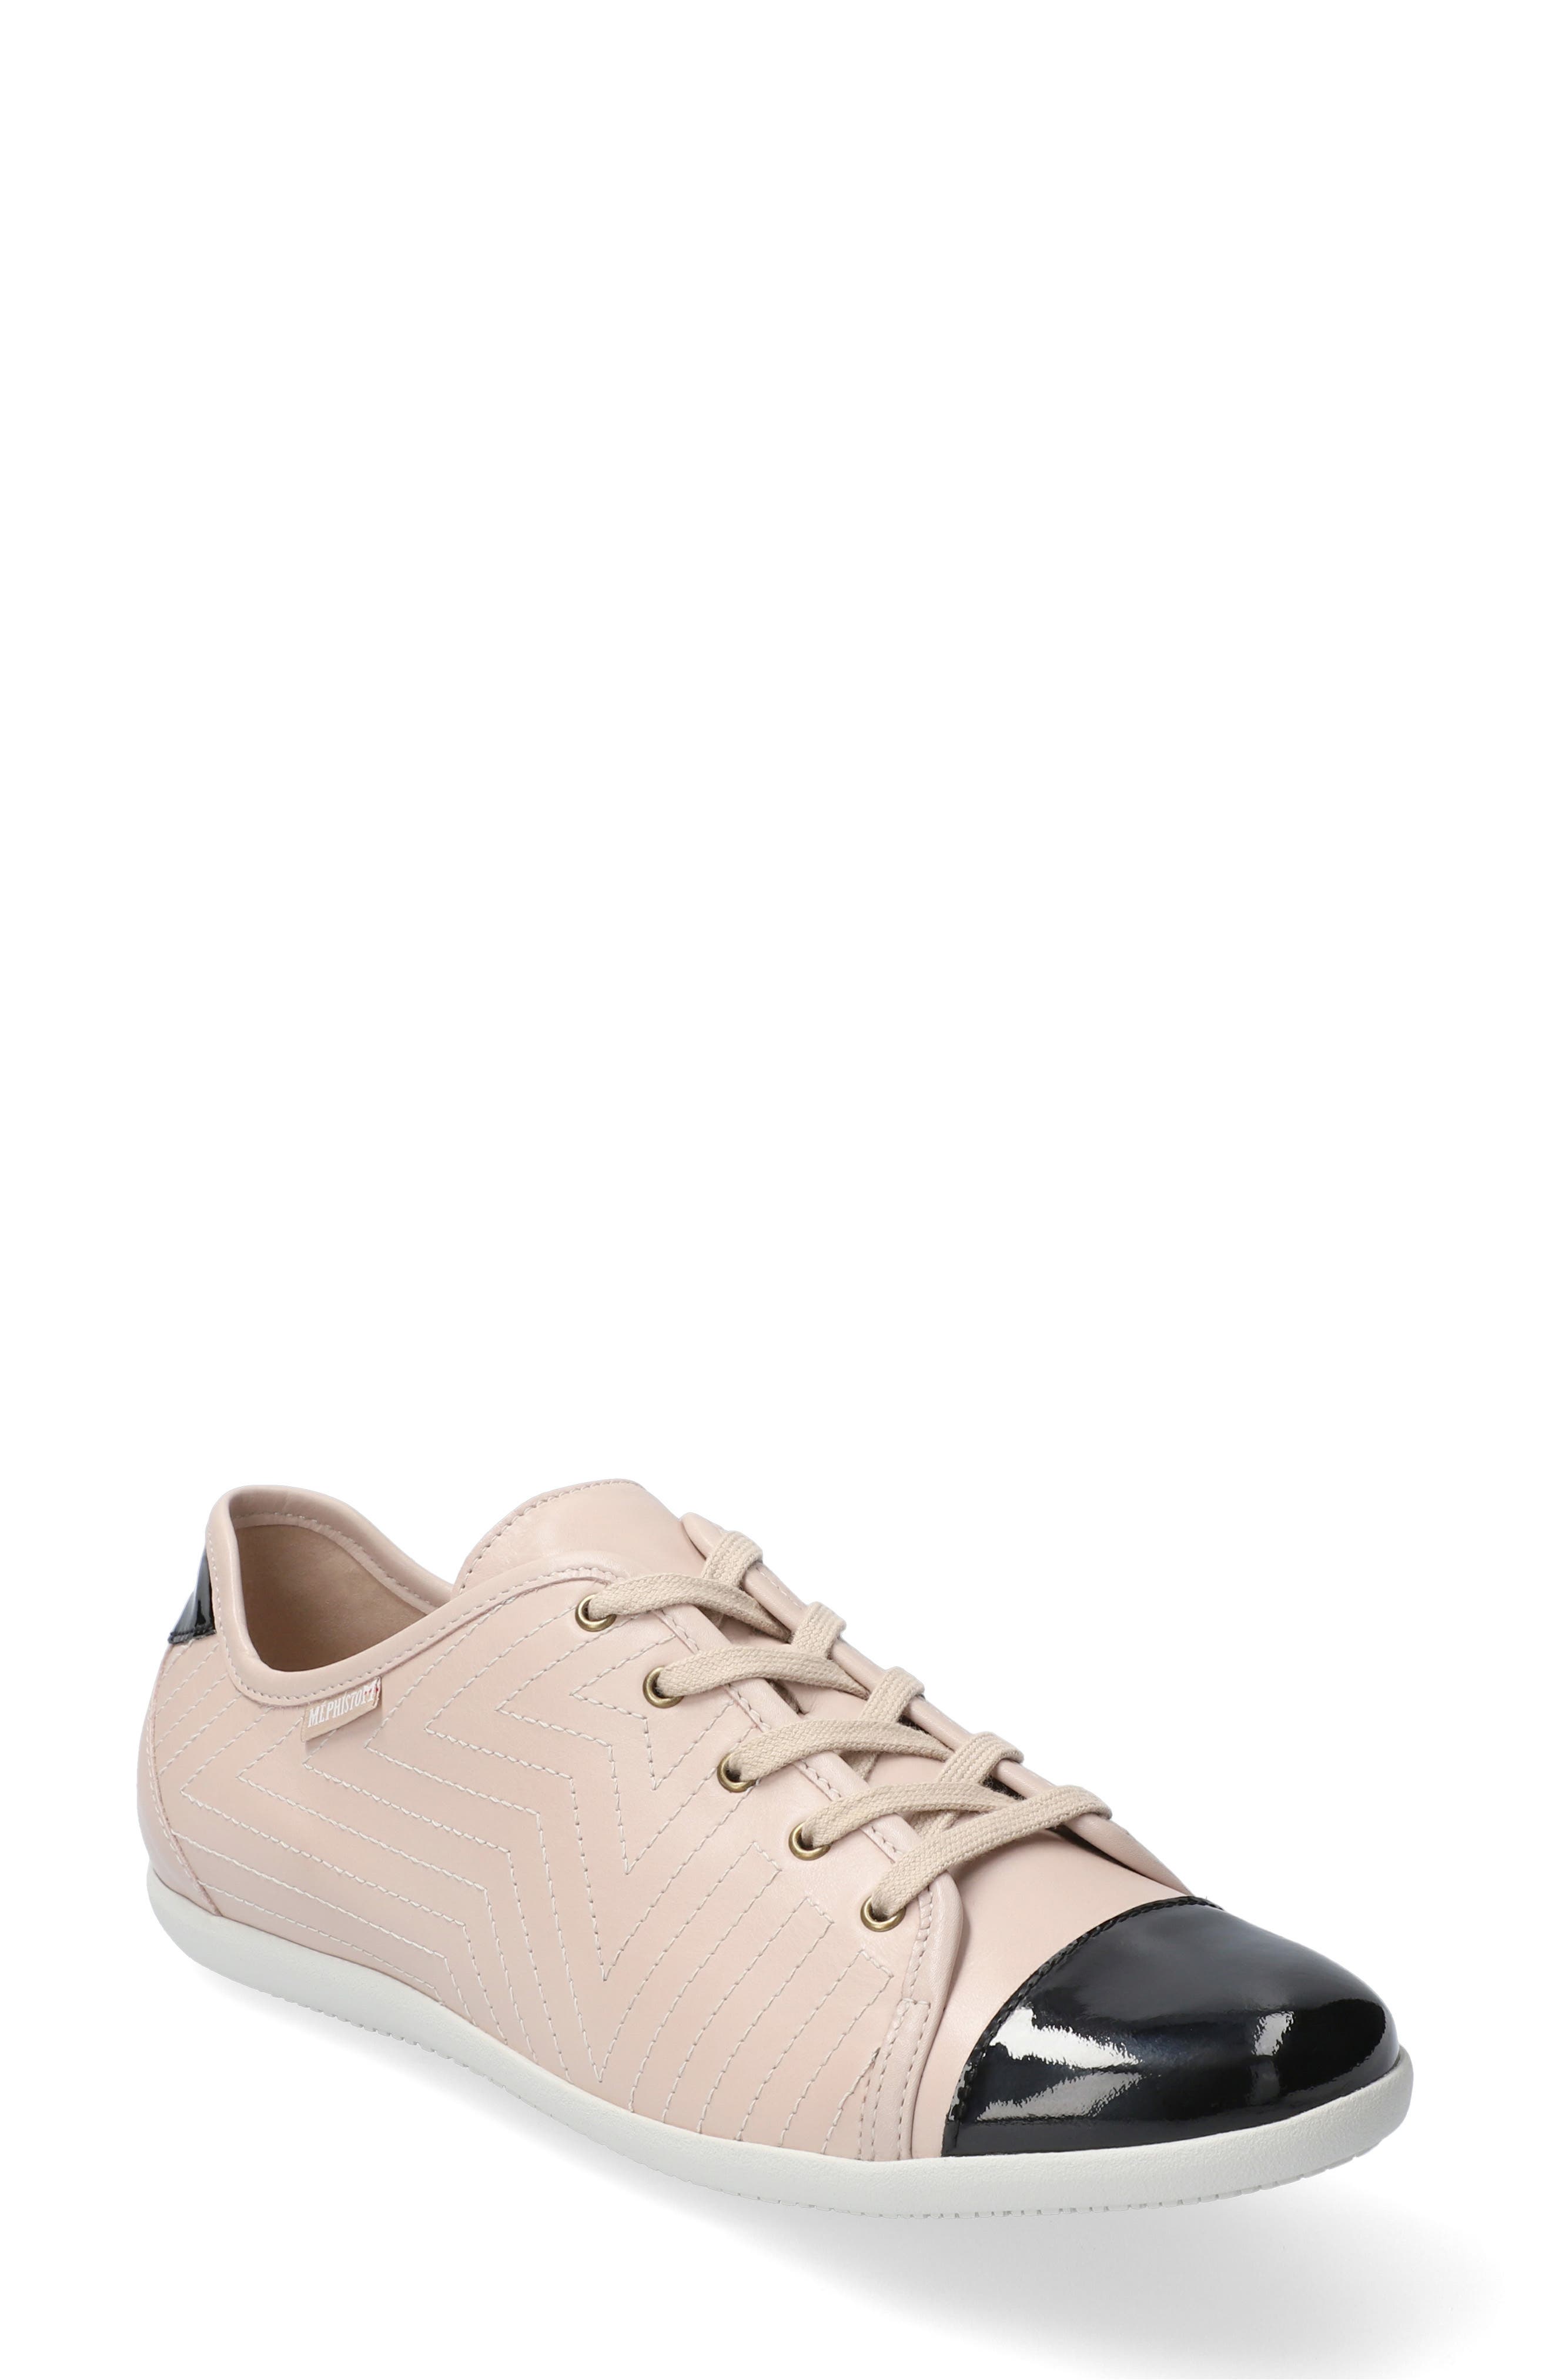 nordstrom mephisto womens shoes